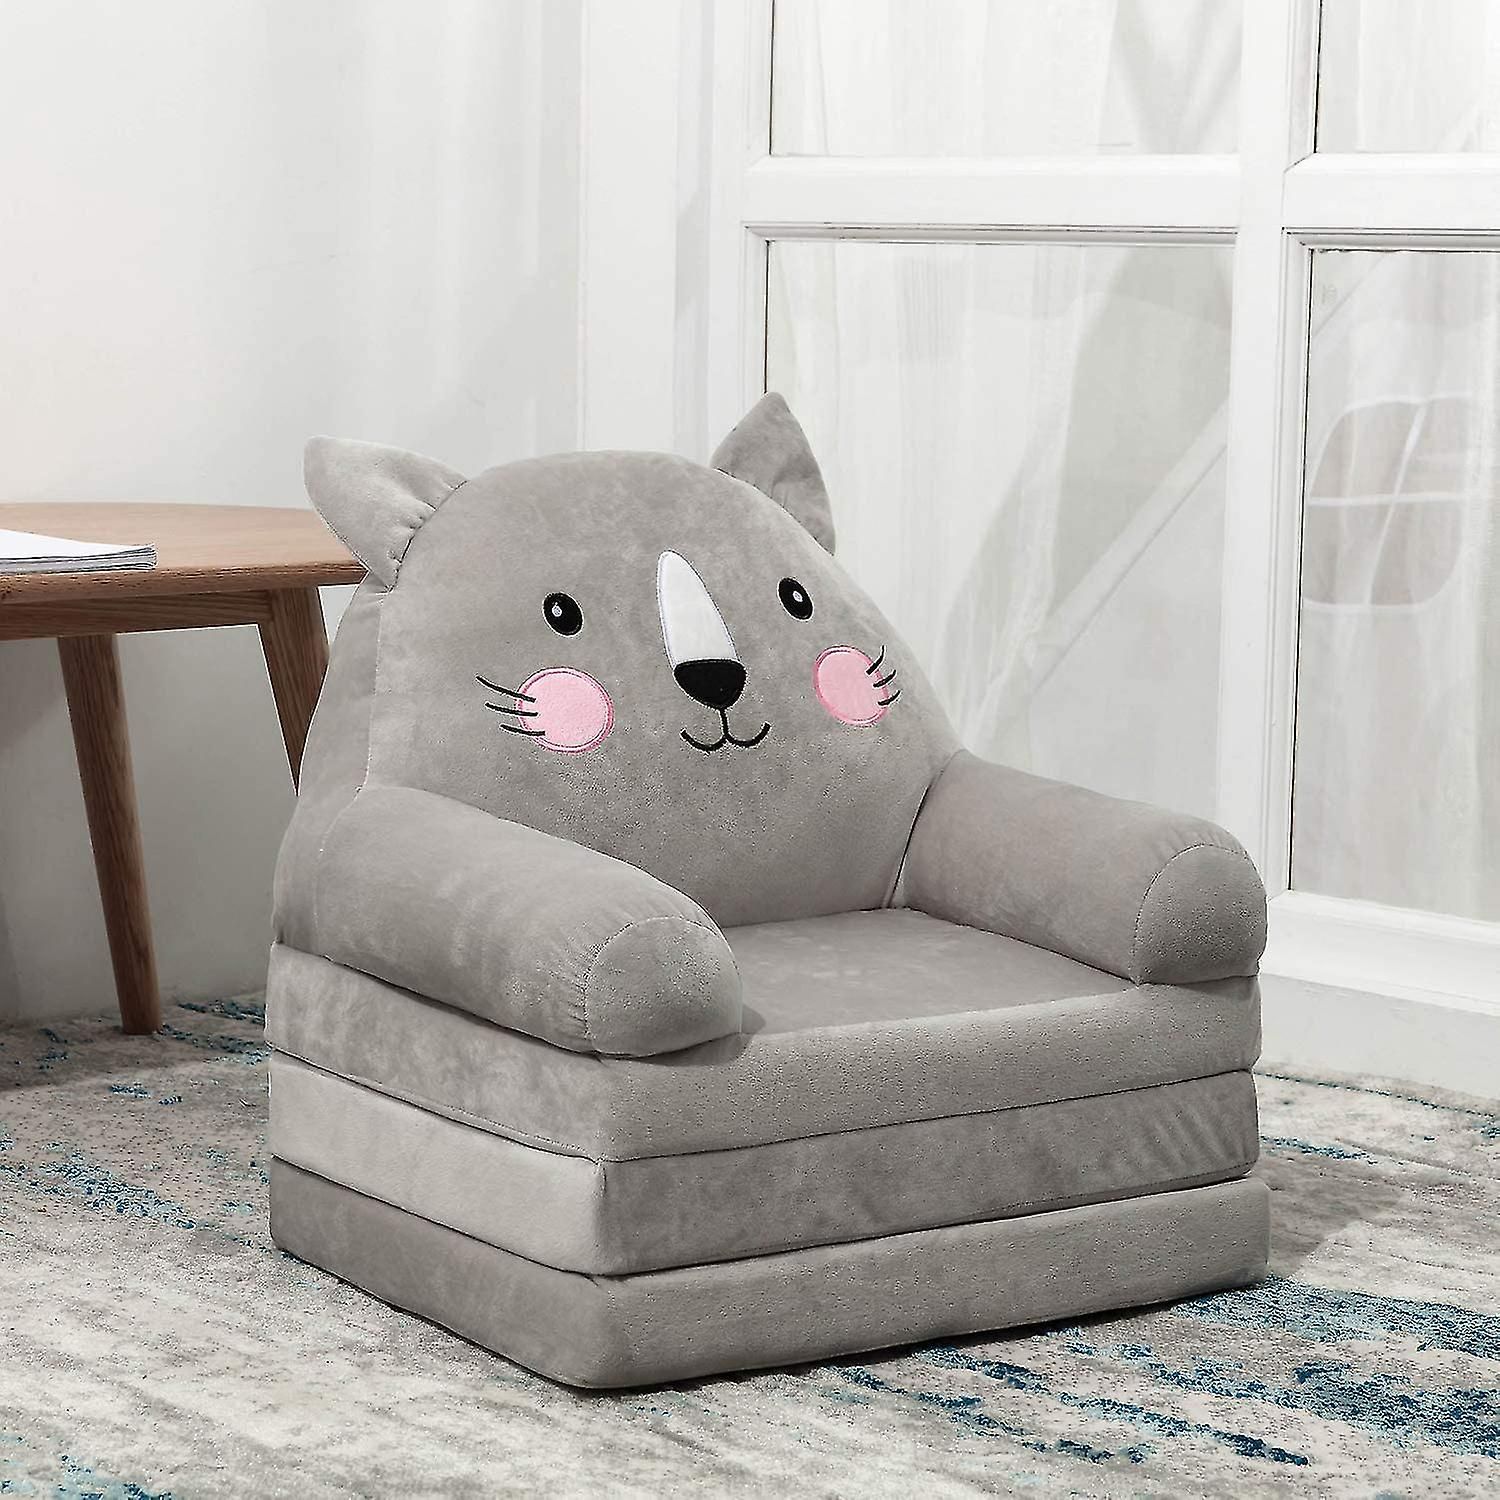 Cartoon Foldable Kids Sofa, Plush Cat Shape Children Couch Backrest  Armchair Bed With Pocket, Upholstered 2 In 1 Flip Open Couch | Fruugo It With Children's Sofa Beds (View 3 of 15)